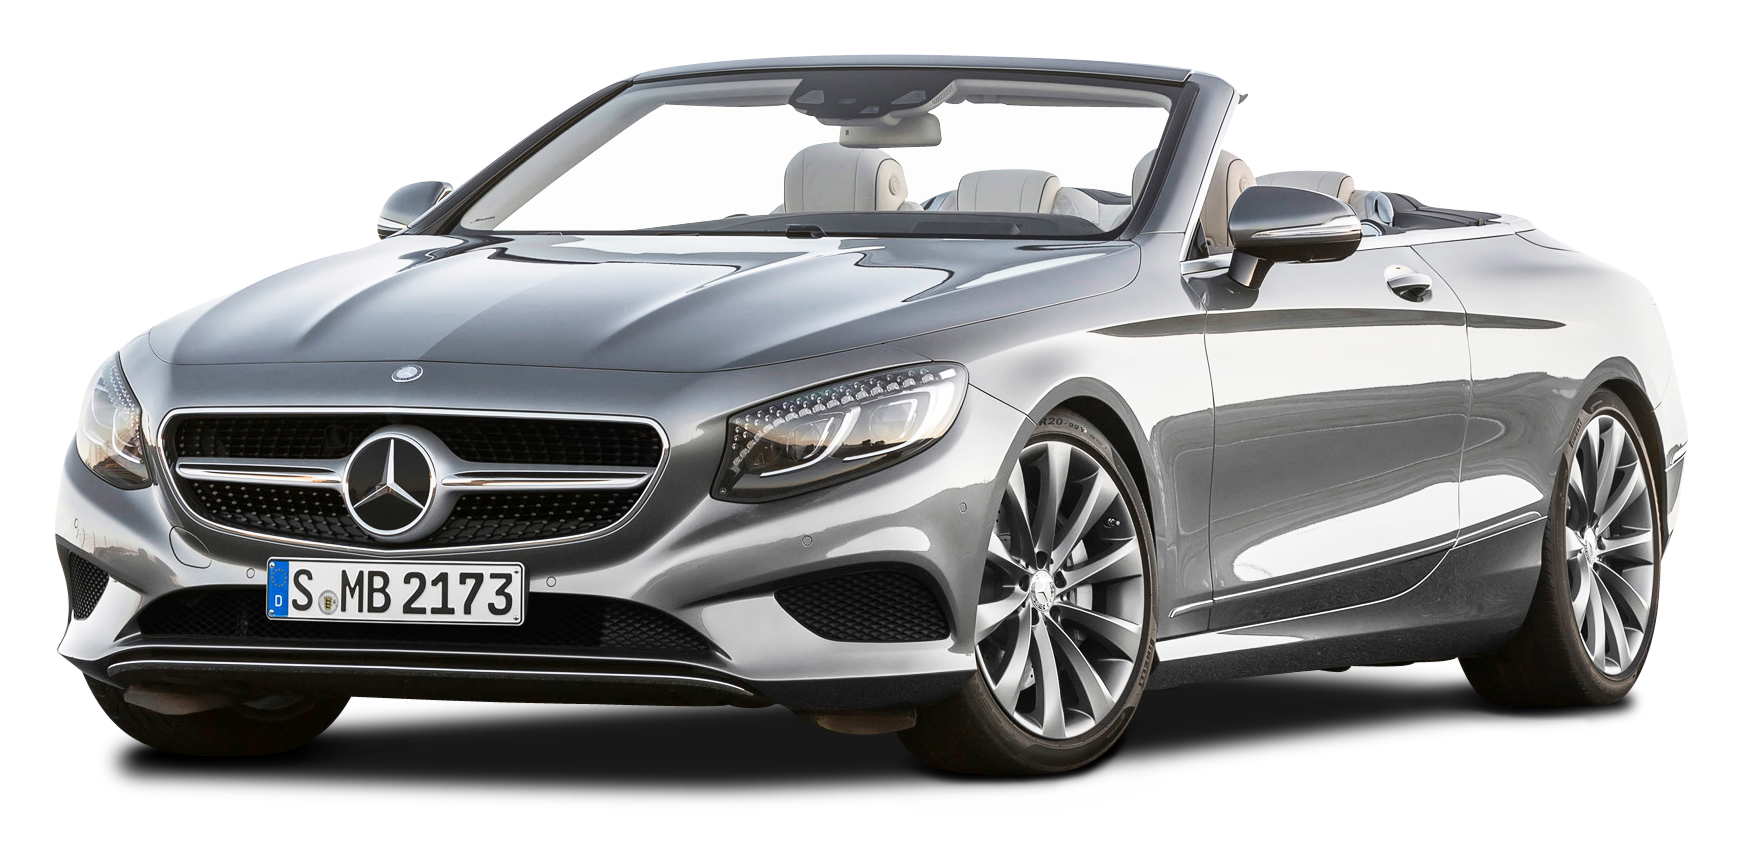 Silver Mercedes Benz S Class Cabriolet Car PNG Image